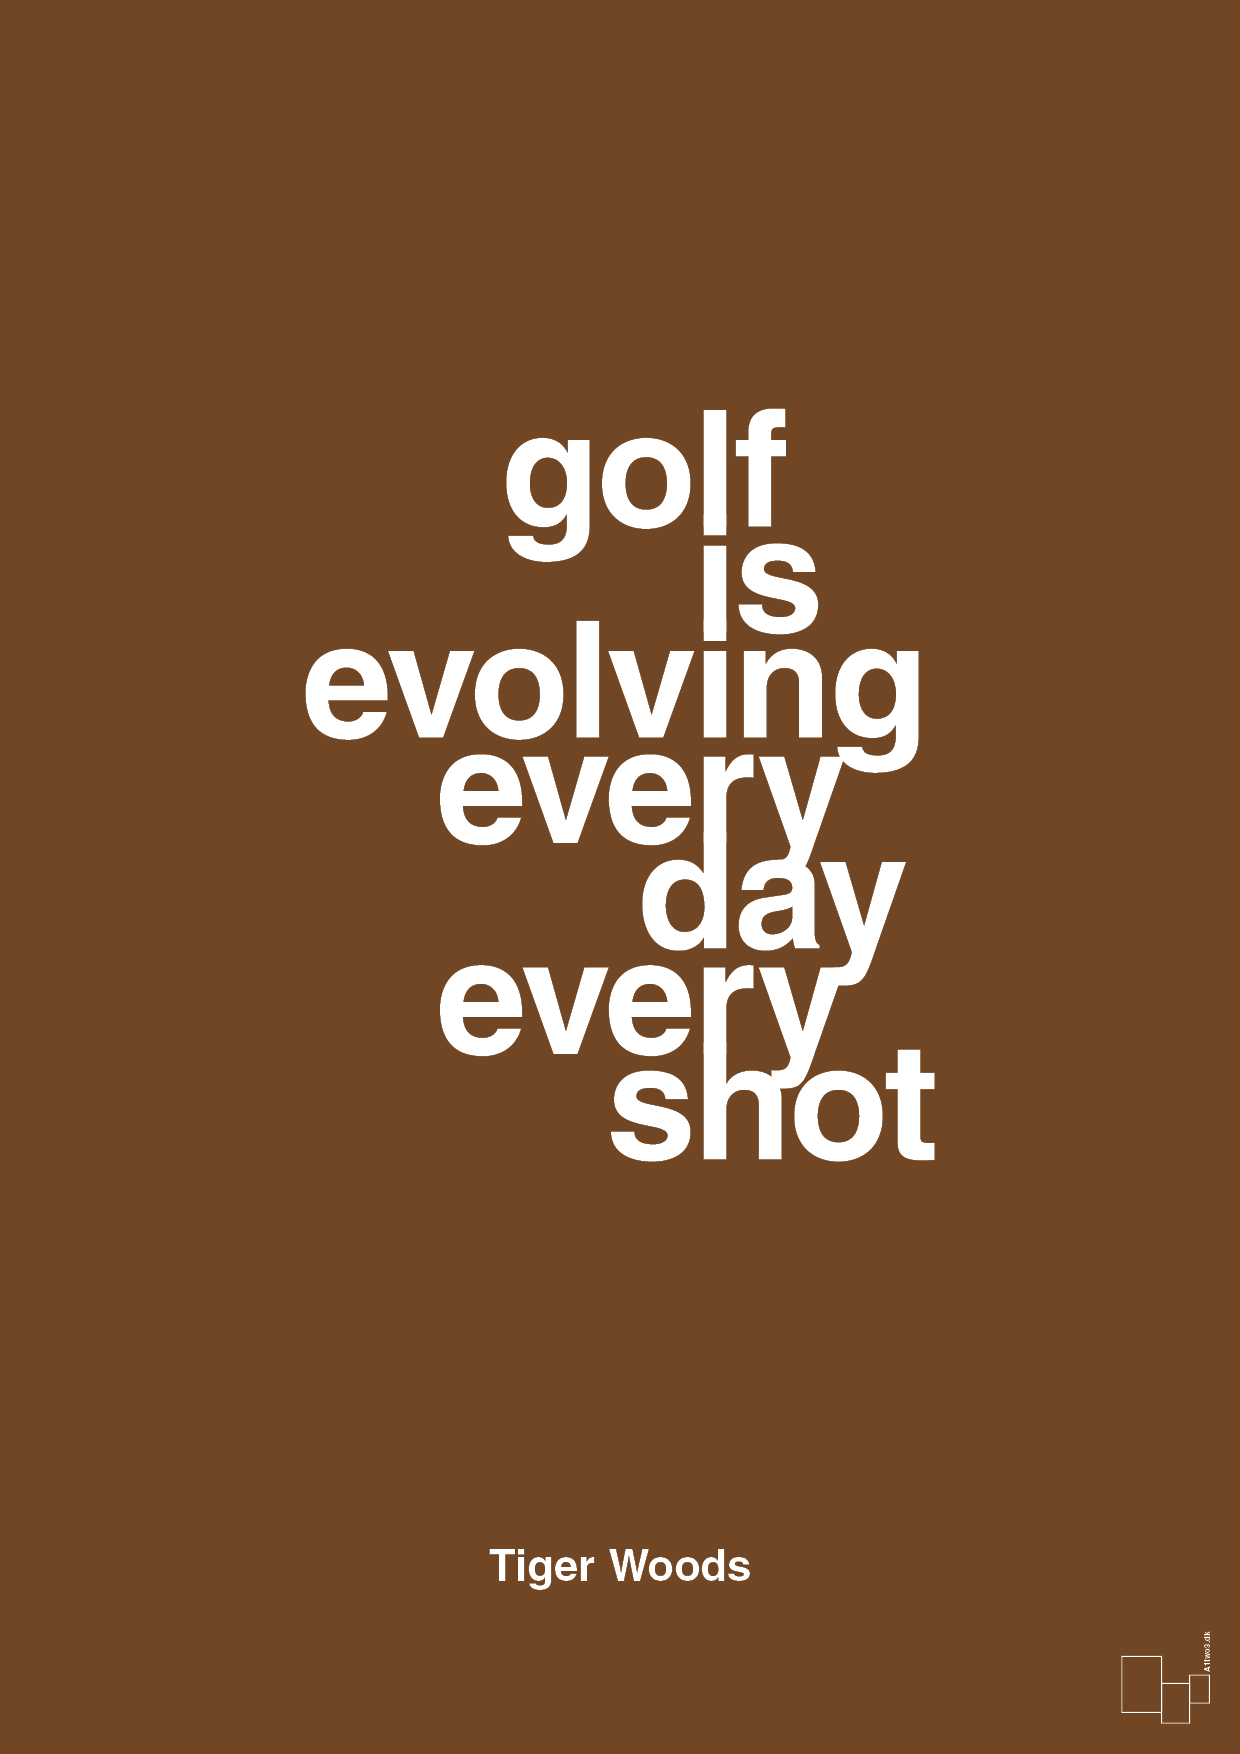 golf is evolving every day every shot - Plakat med Citater i Dark Brown